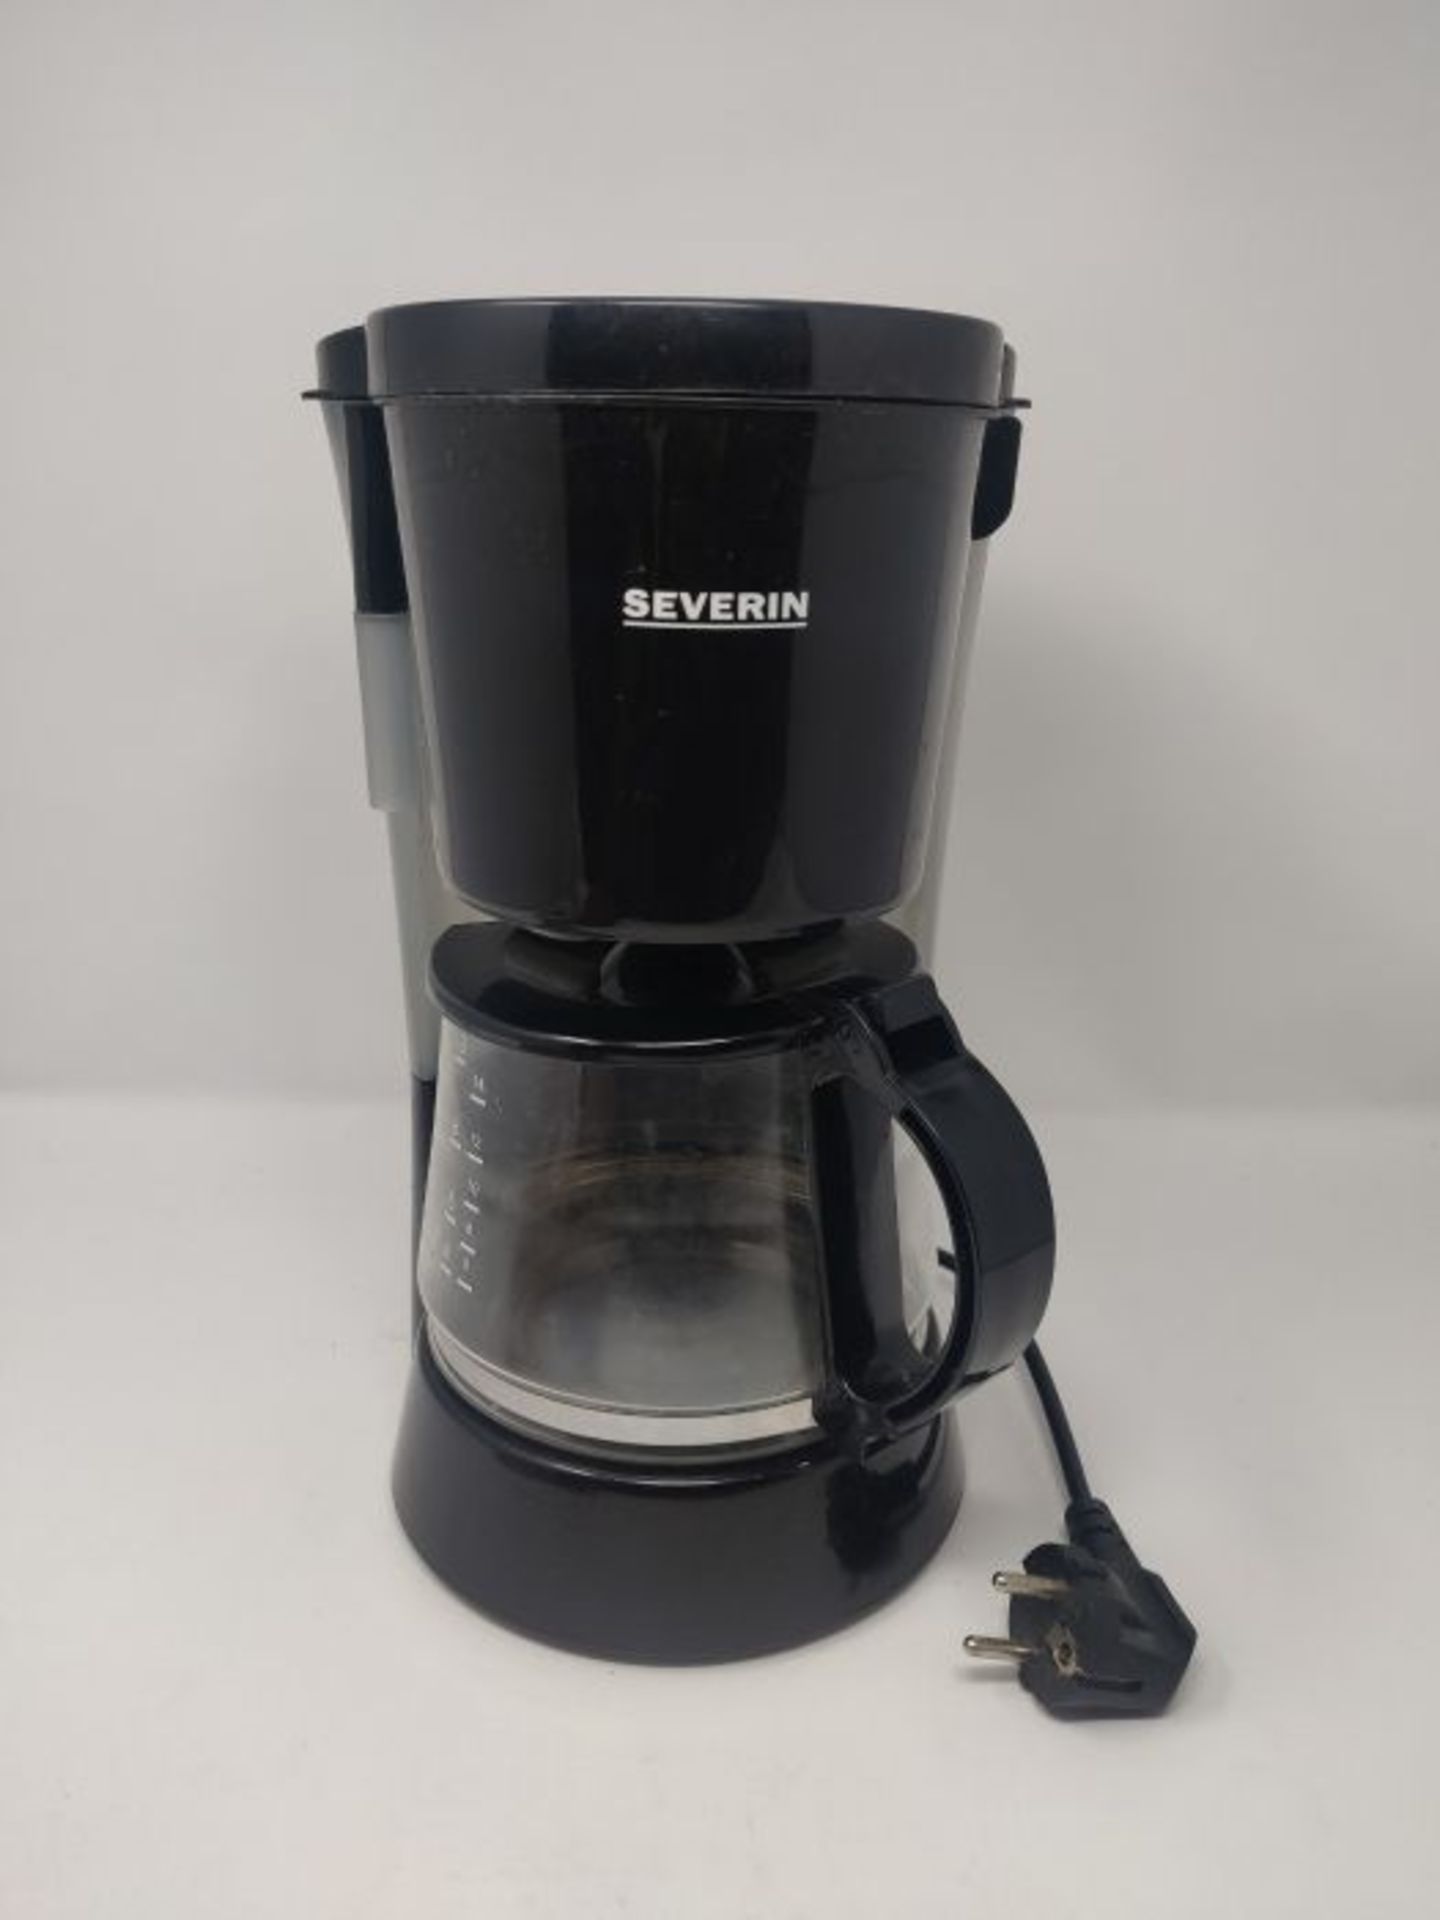 Severin Coffee Maker with 800 W of Power KA 4479, Black - Image 3 of 3